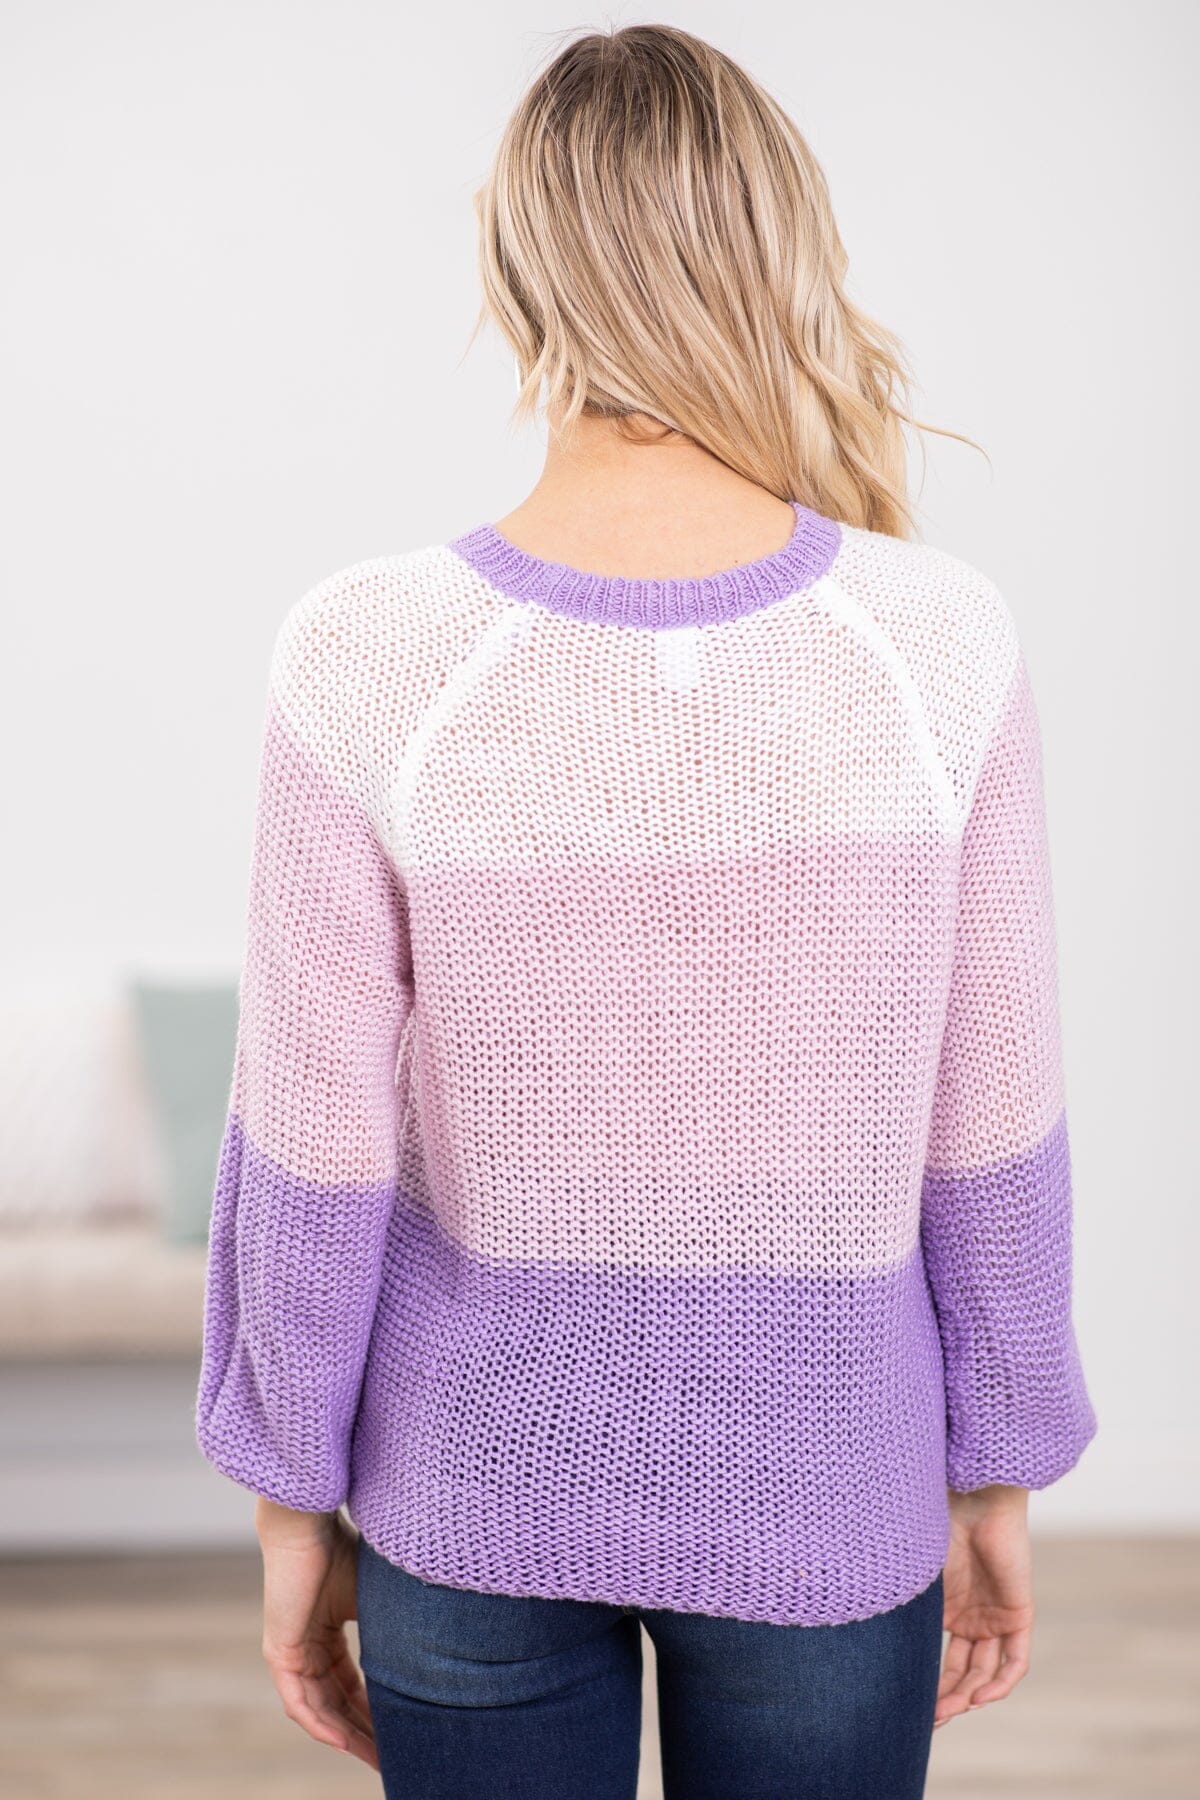 Lavender Colorblock Sweater - Filly Flair